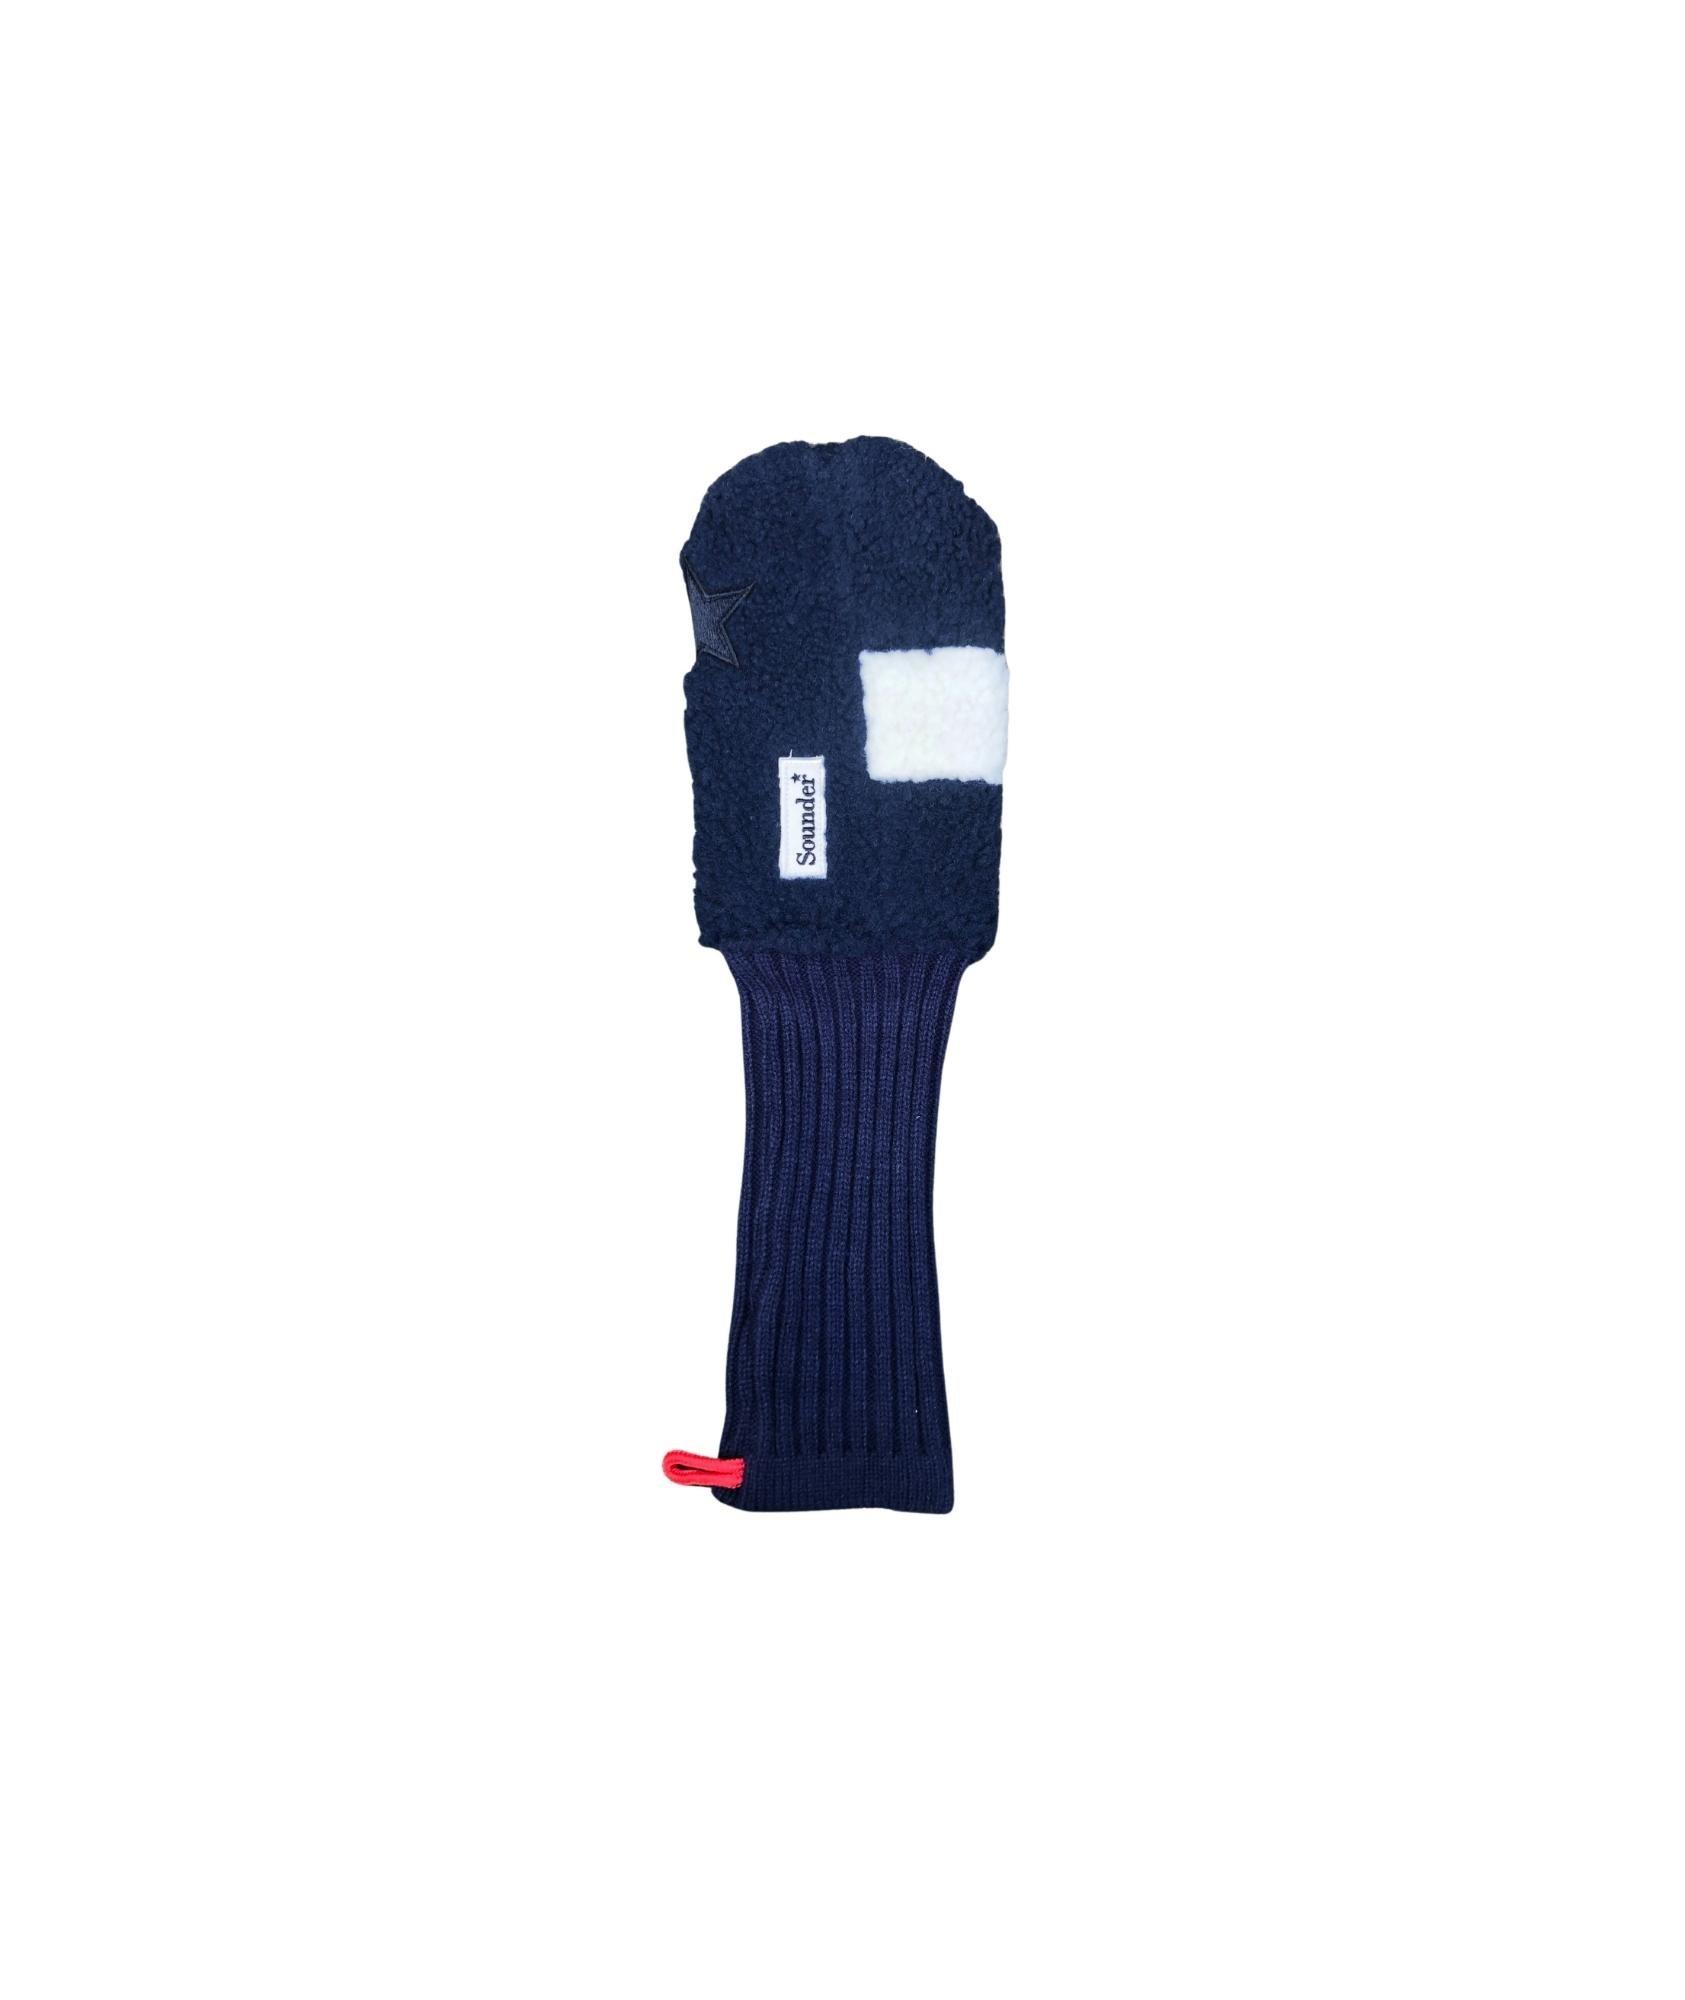 Driver Headcover image 0